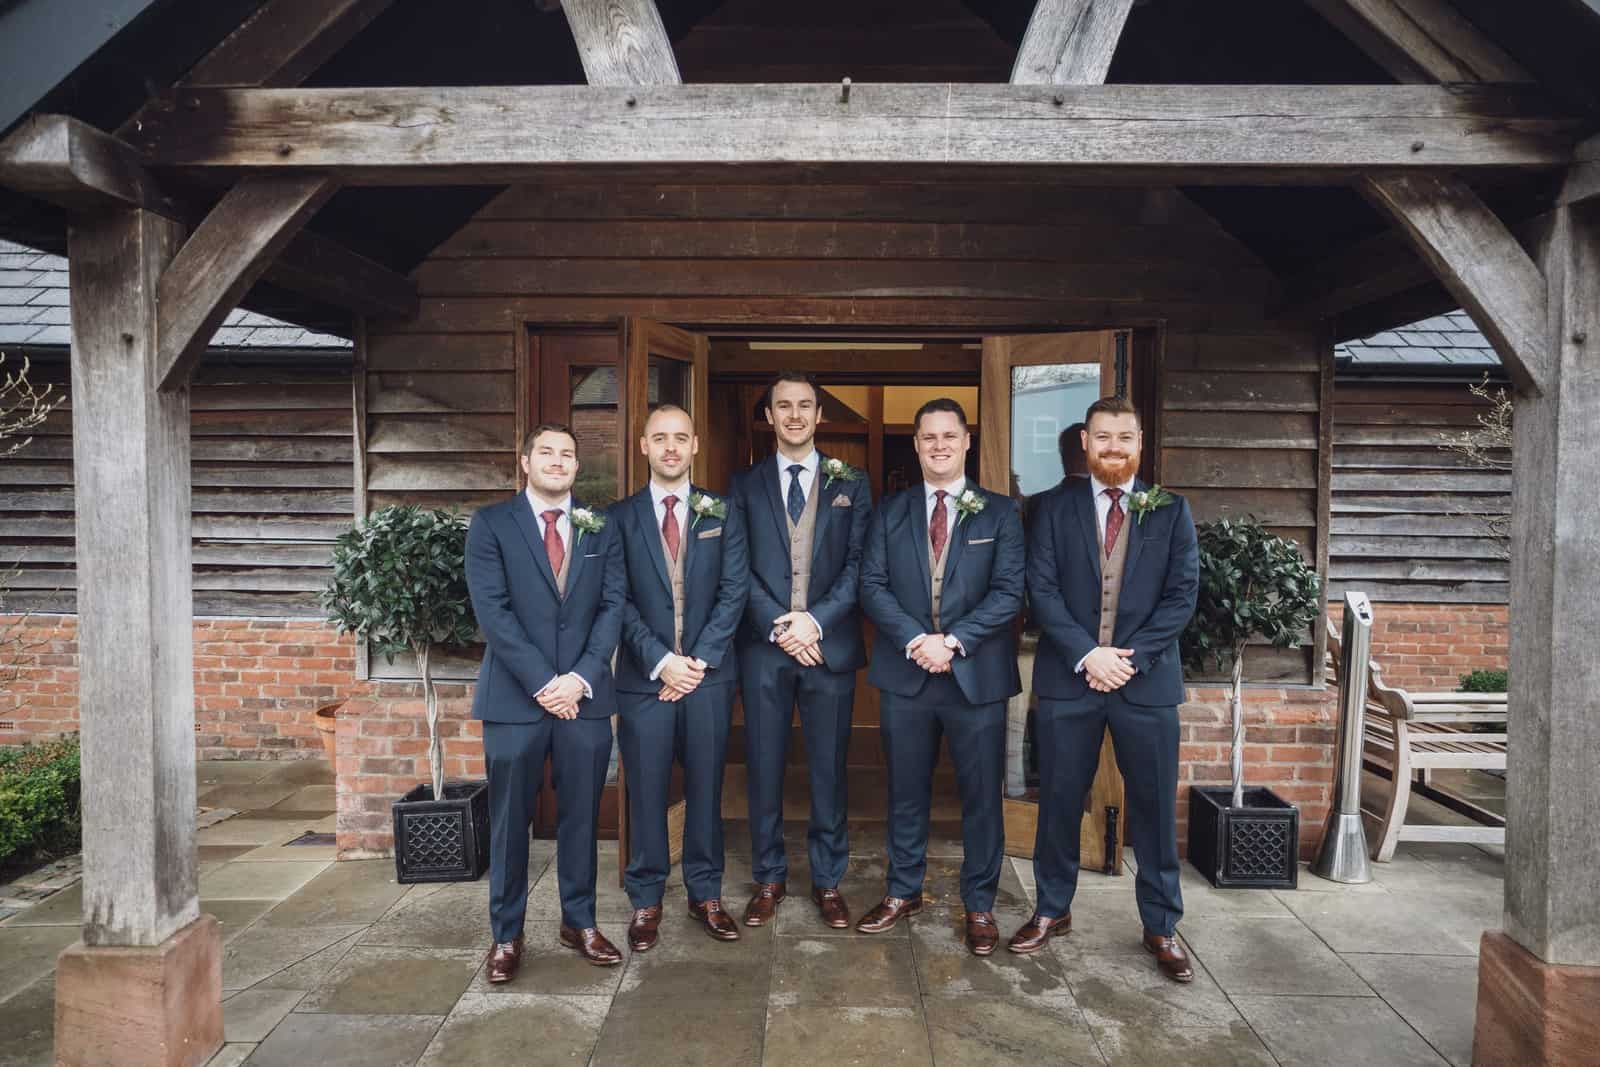 Whitfield & Ward - WEDDING SUIT INSPIRATION - Our Balmoral morning